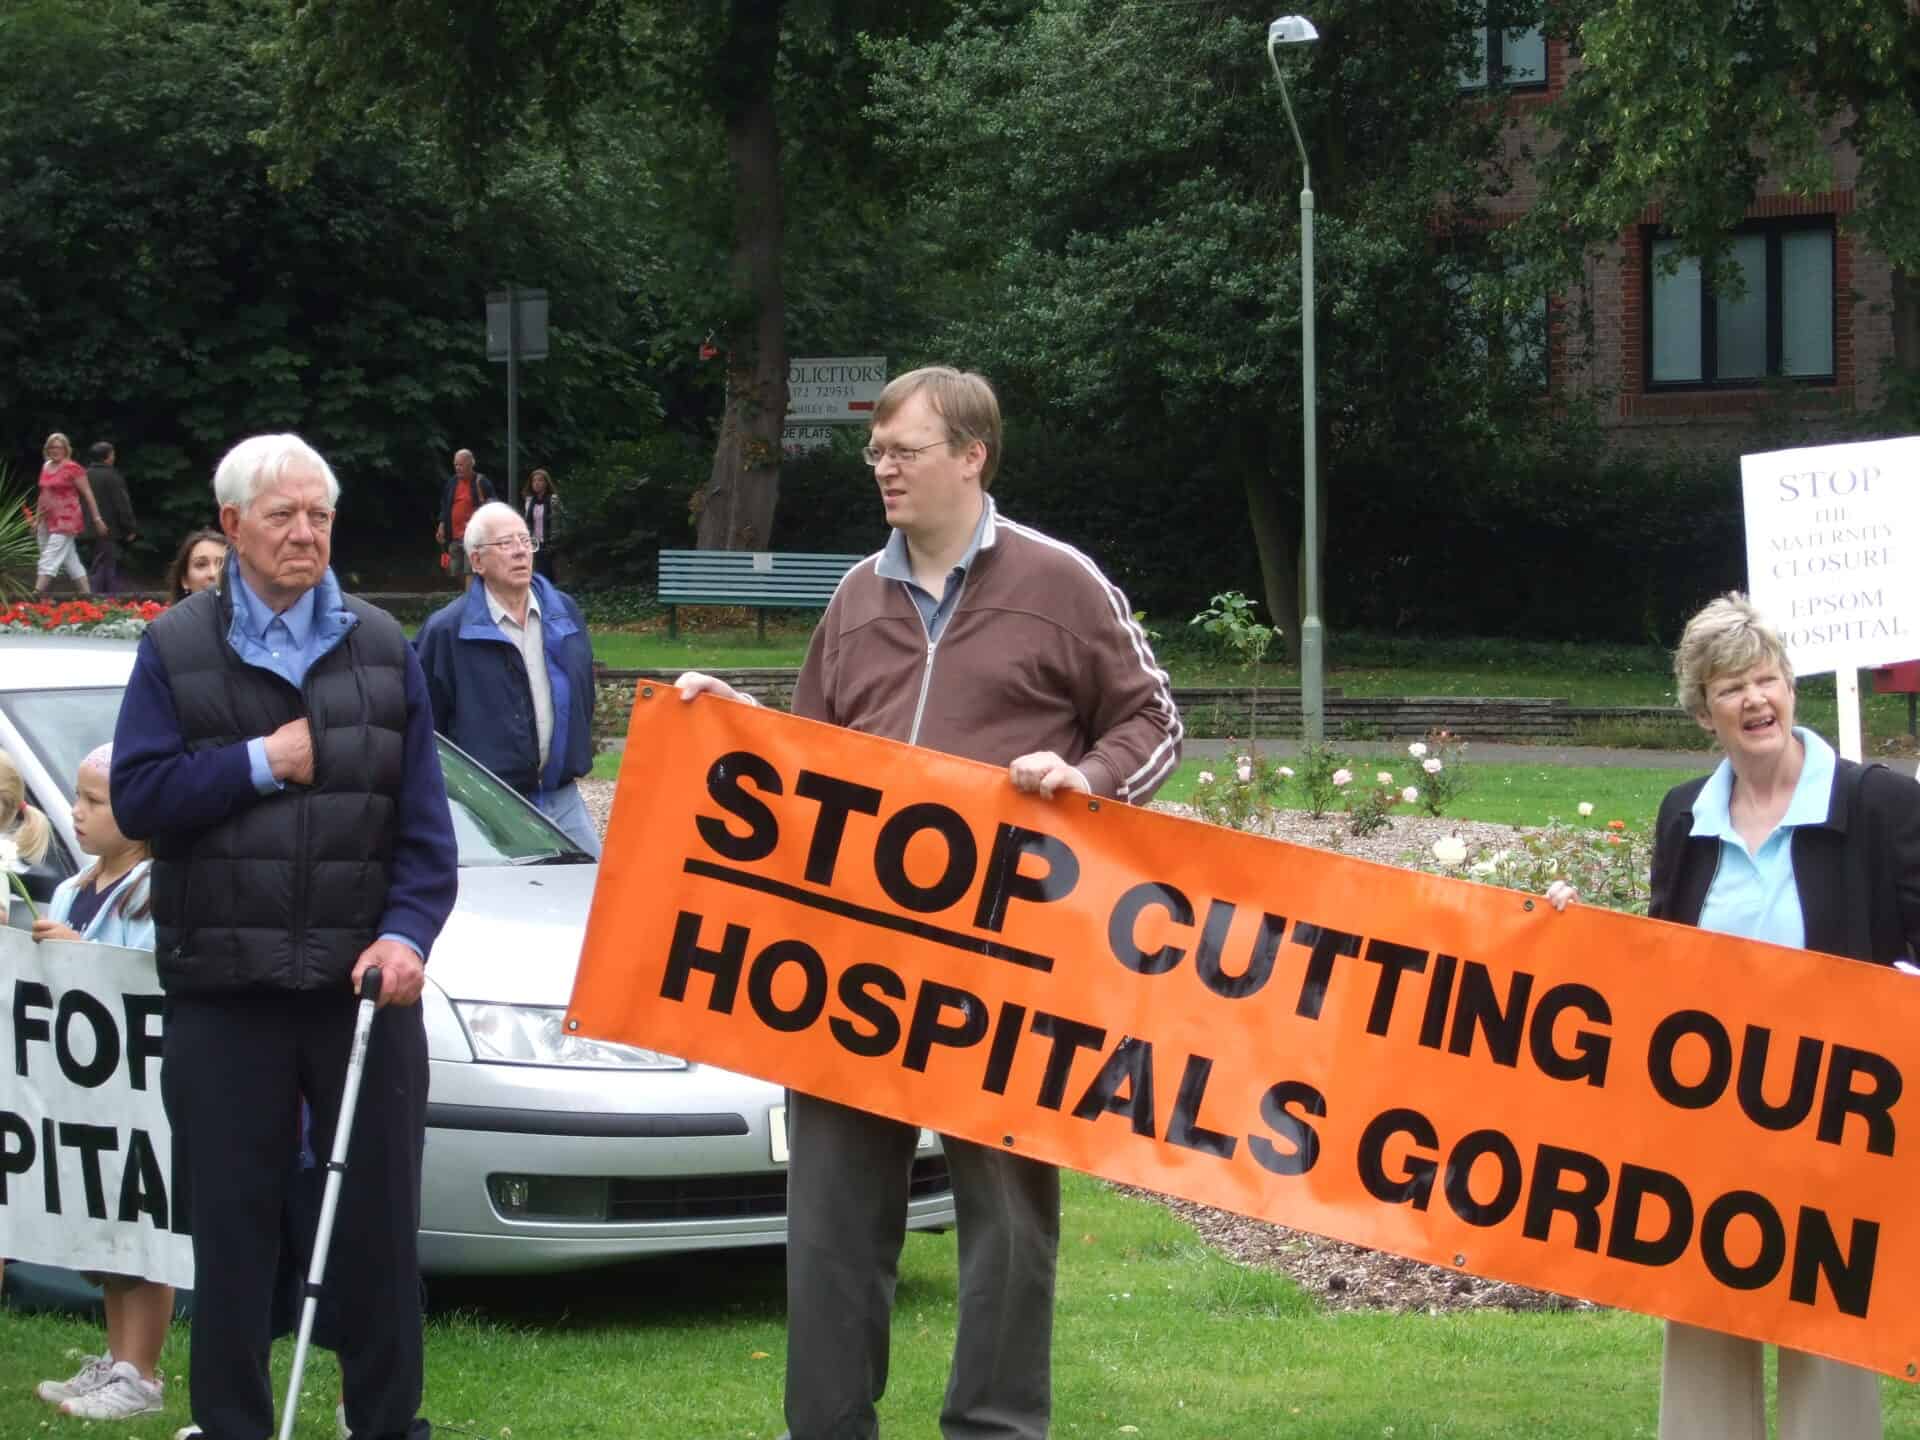 Group of people demonstrating with a banner reading "stop cutting hospitals gordon" in a park-like setting.